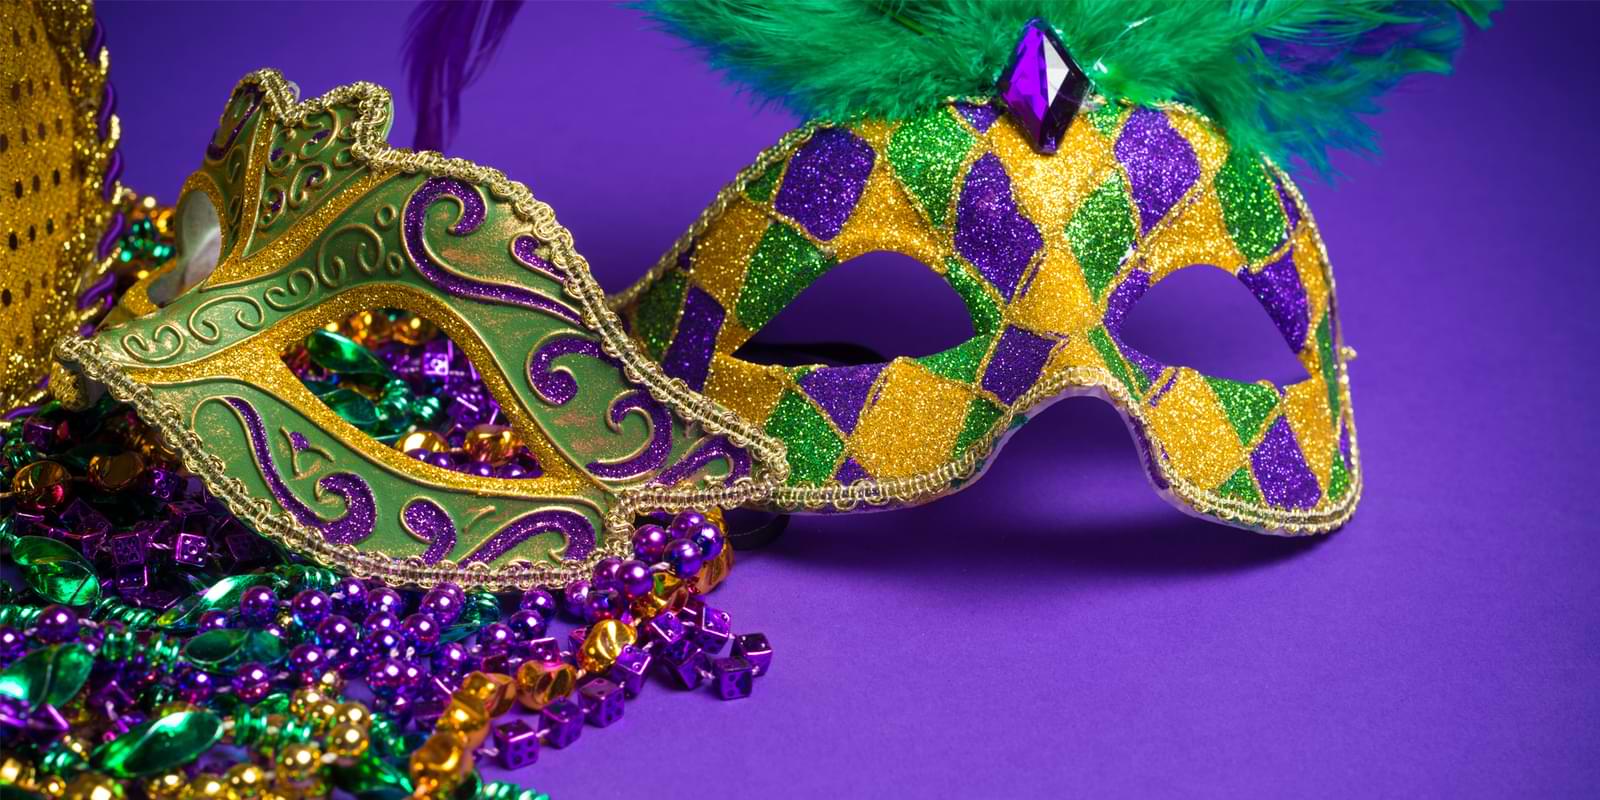 COVID SAFE APPROACH FOR MARDI GRAS